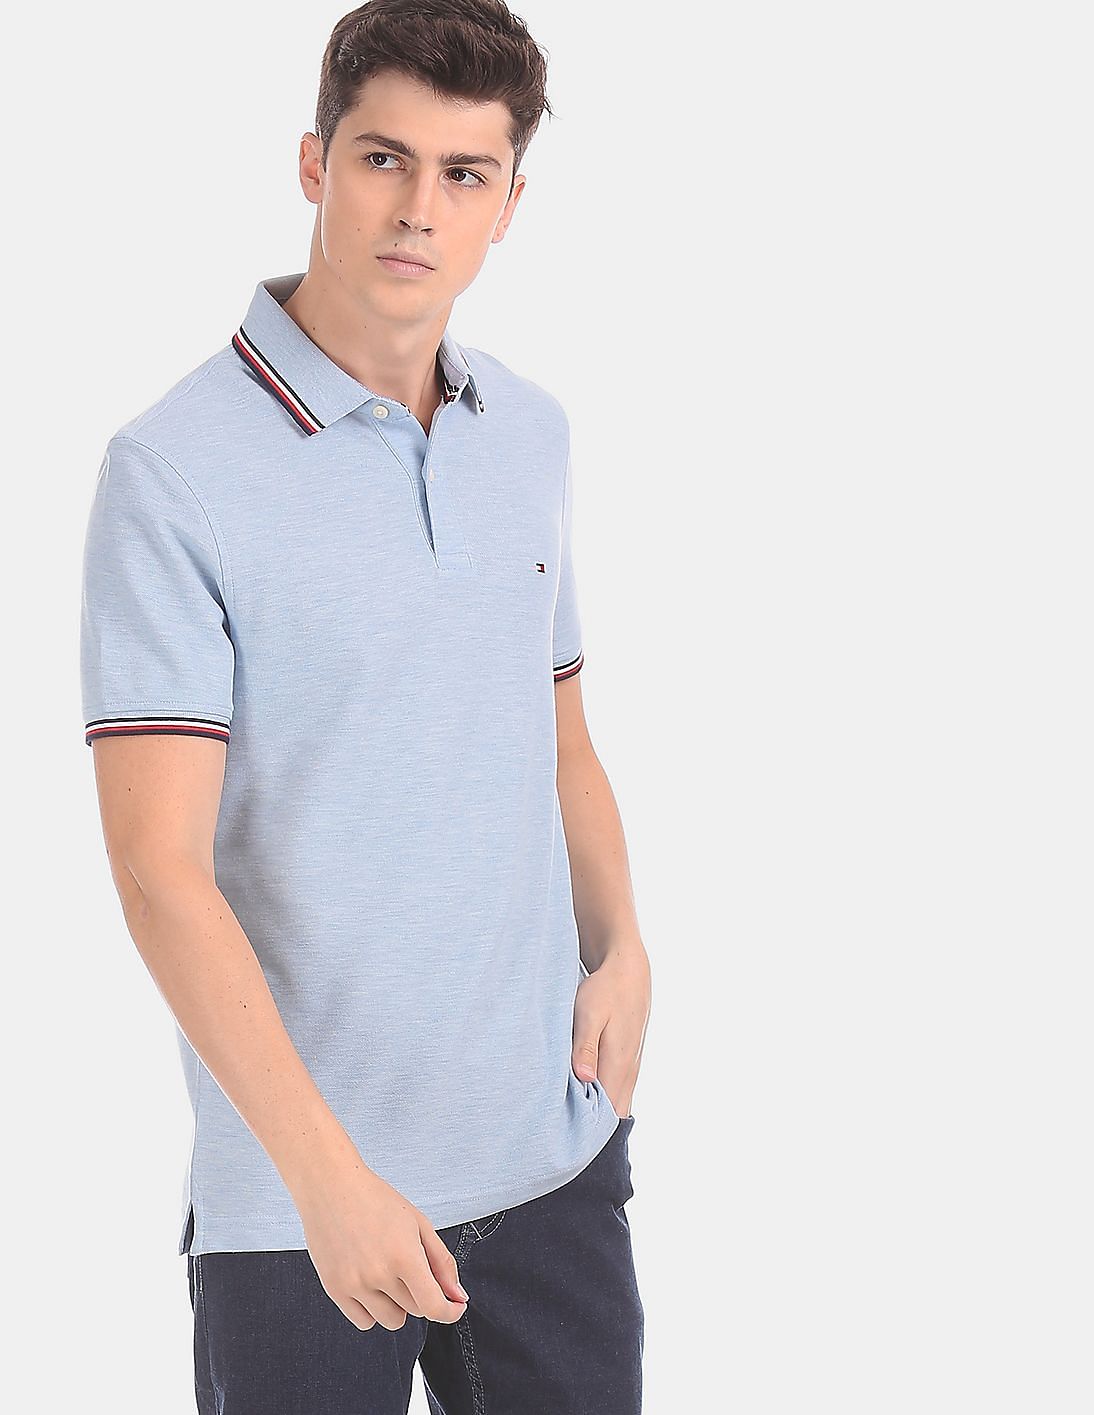 Buy Tommy Hilfiger Men Men Blue Heathered Wicking Tipped Polo Shirt ...